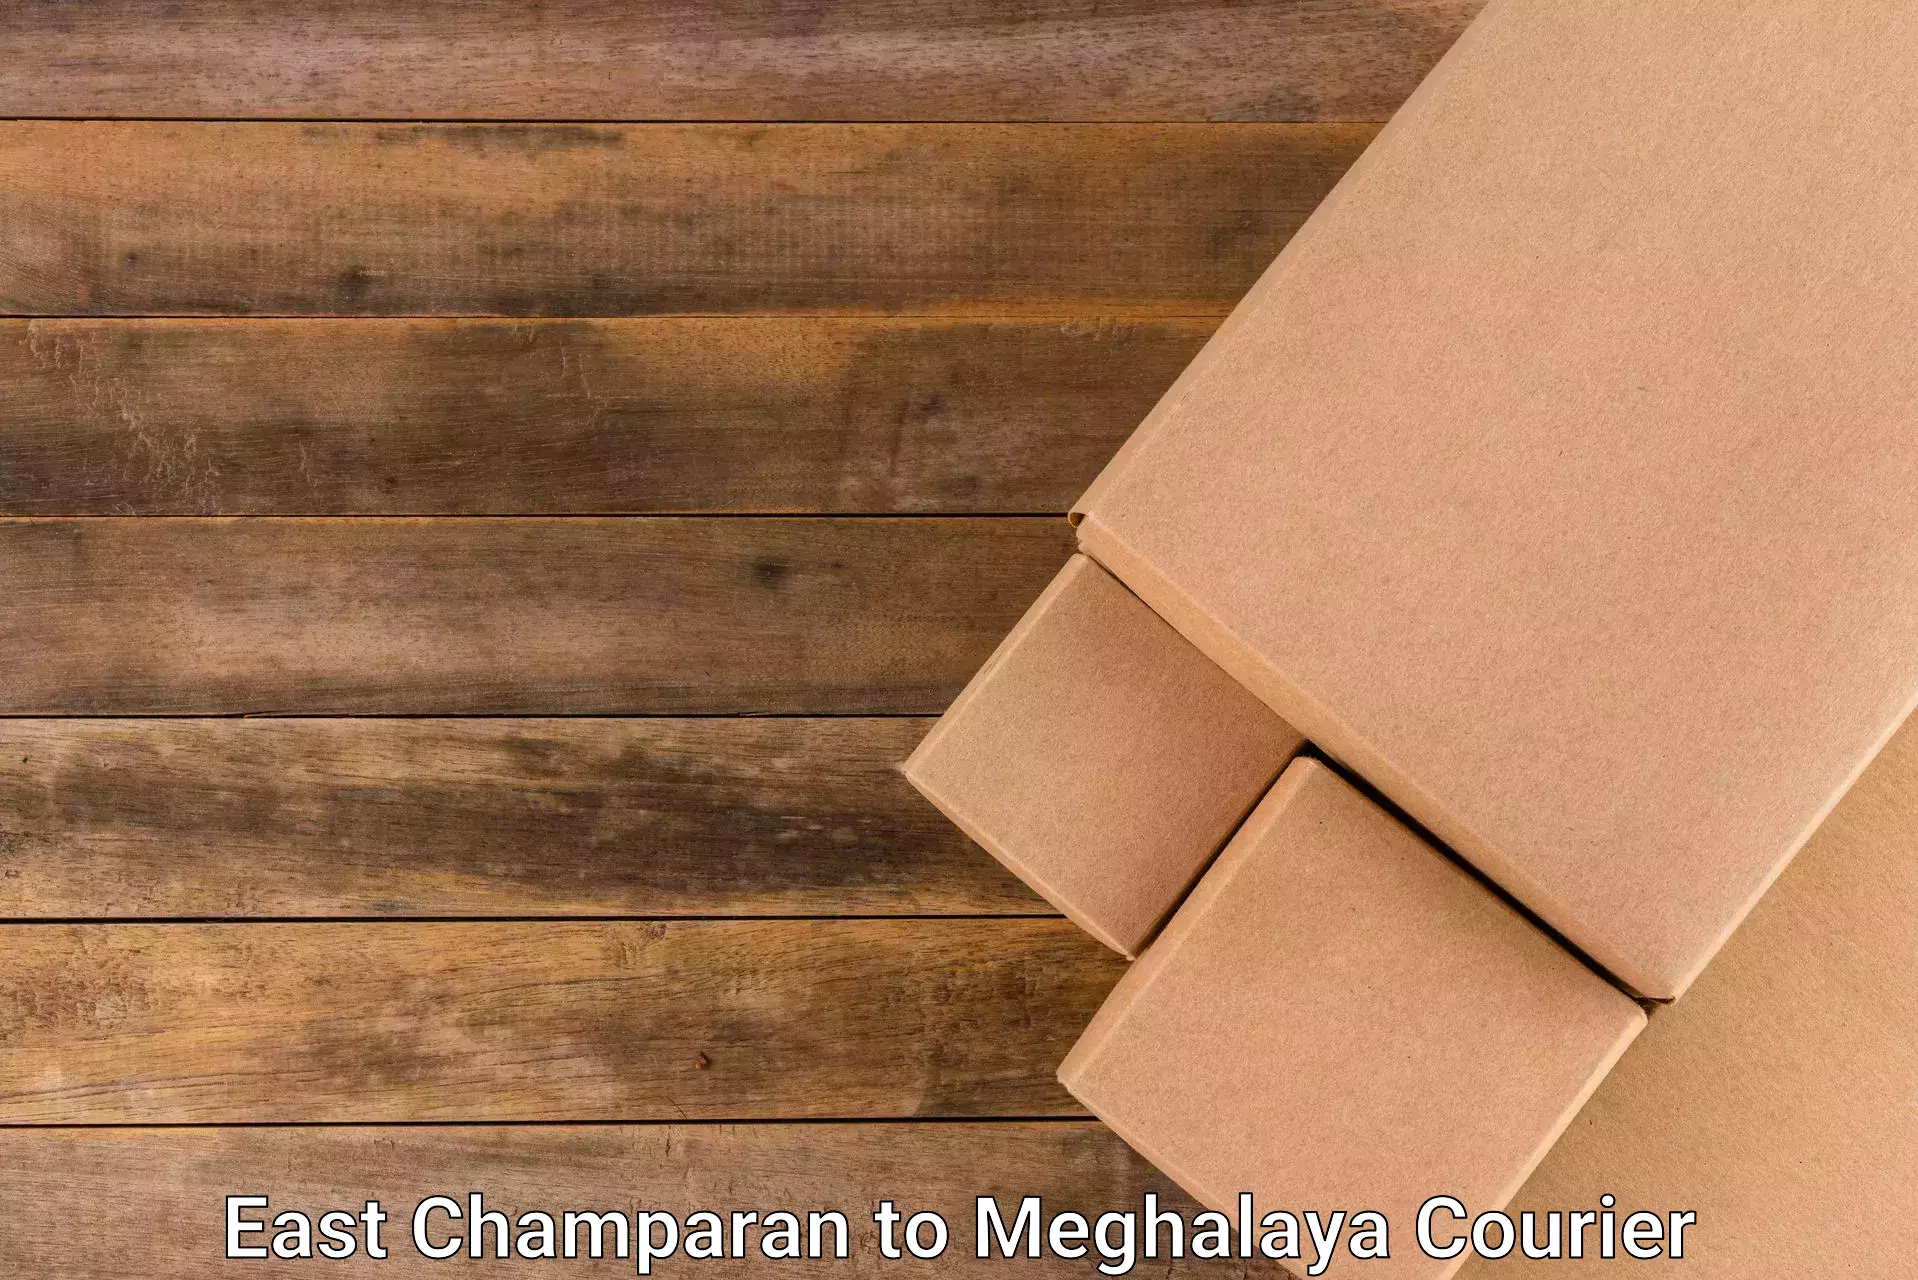 Multi-national courier services East Champaran to Meghalaya